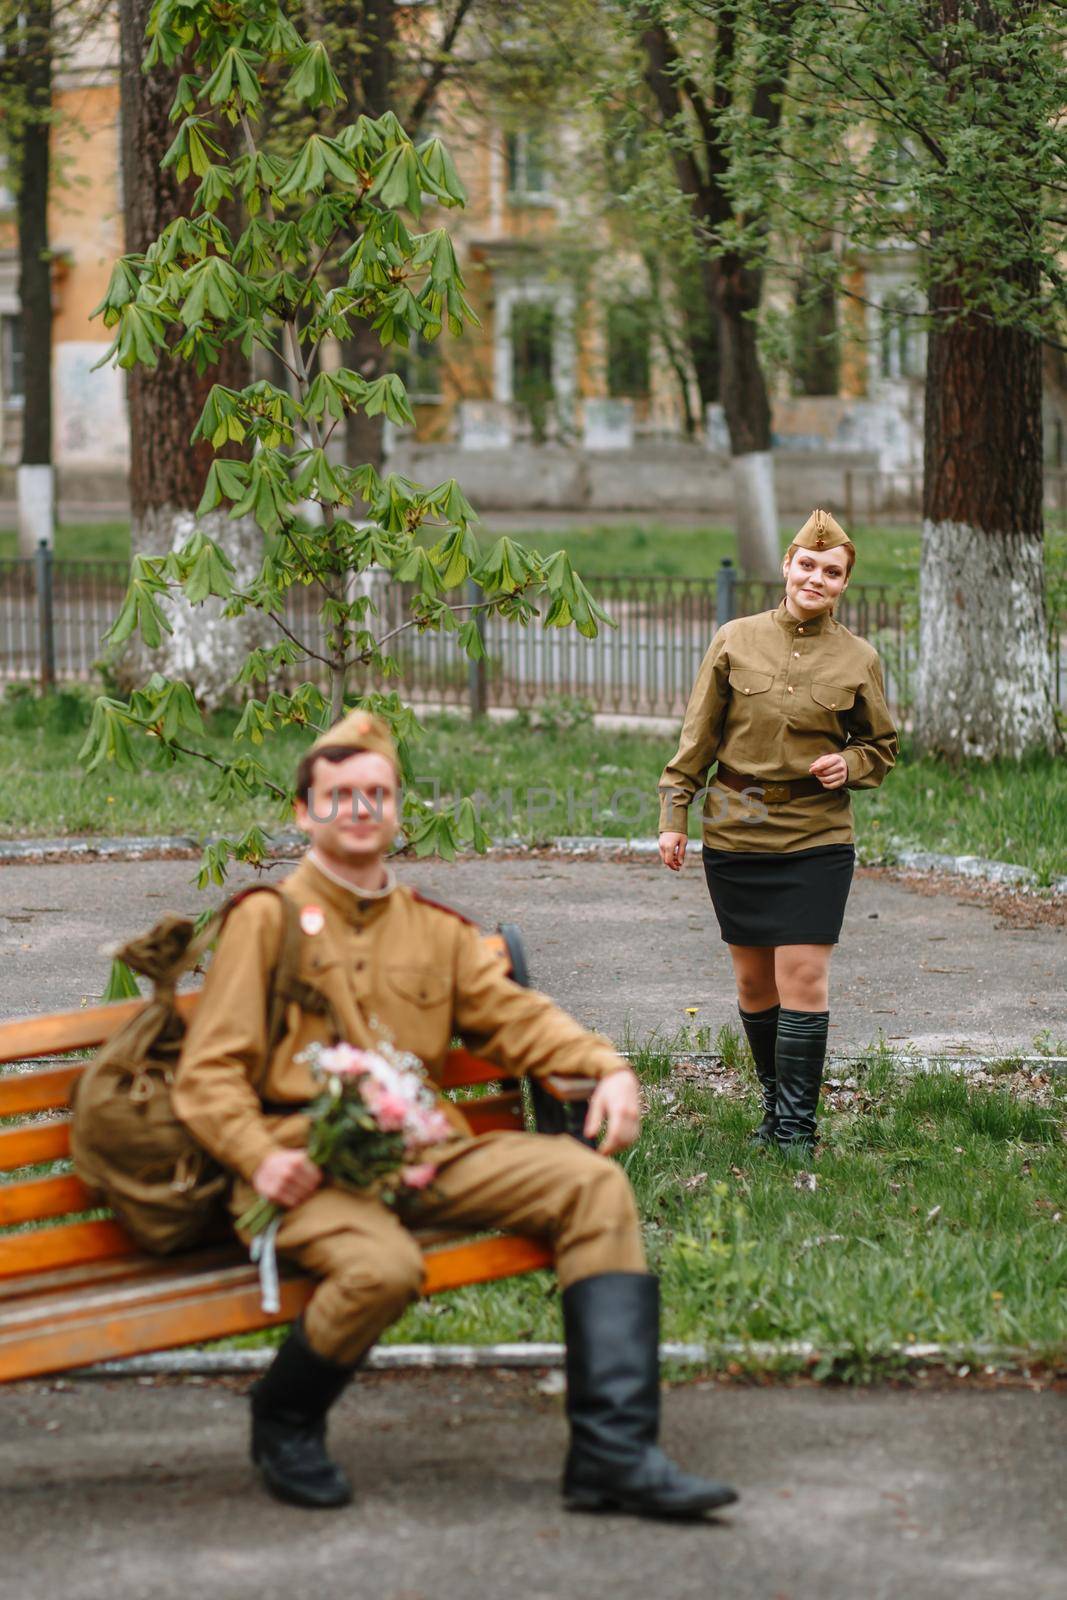 A soldier sitting on a bench waiting, with a bouquet in his hands. A soldier is waiting for a girl